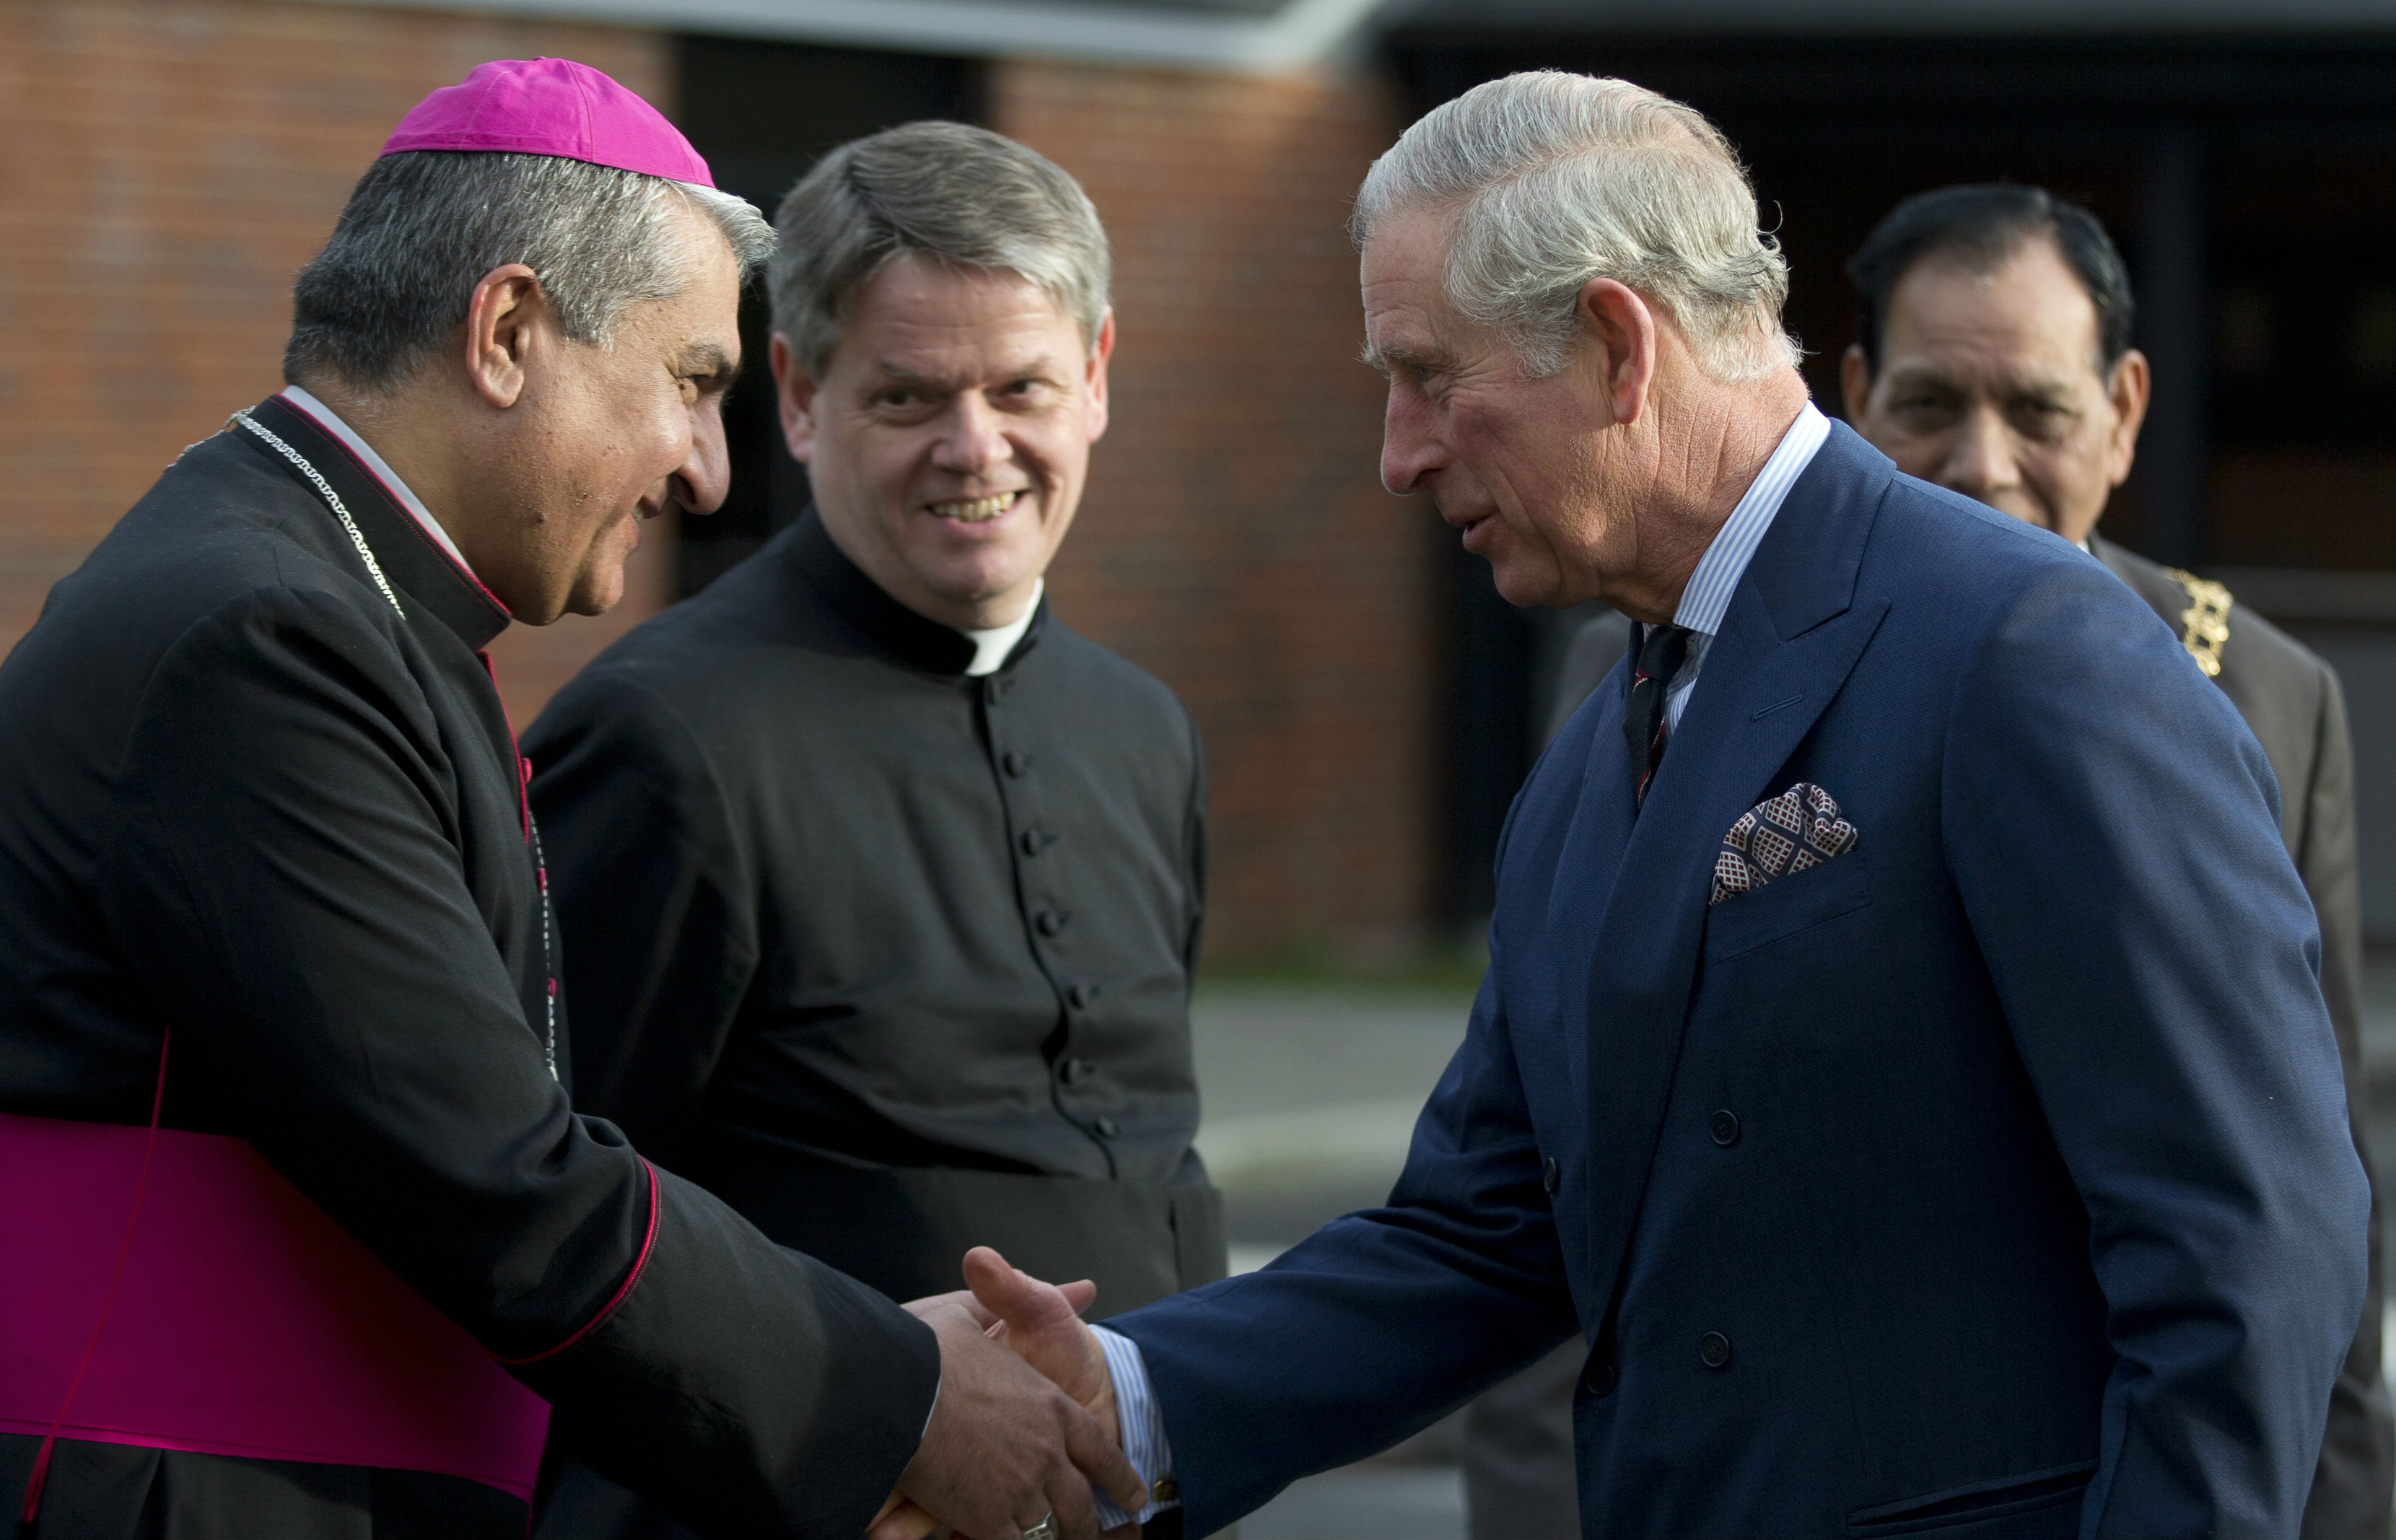 Prince Charles: Christians suffering persecution is like the suffering of the Holy Family